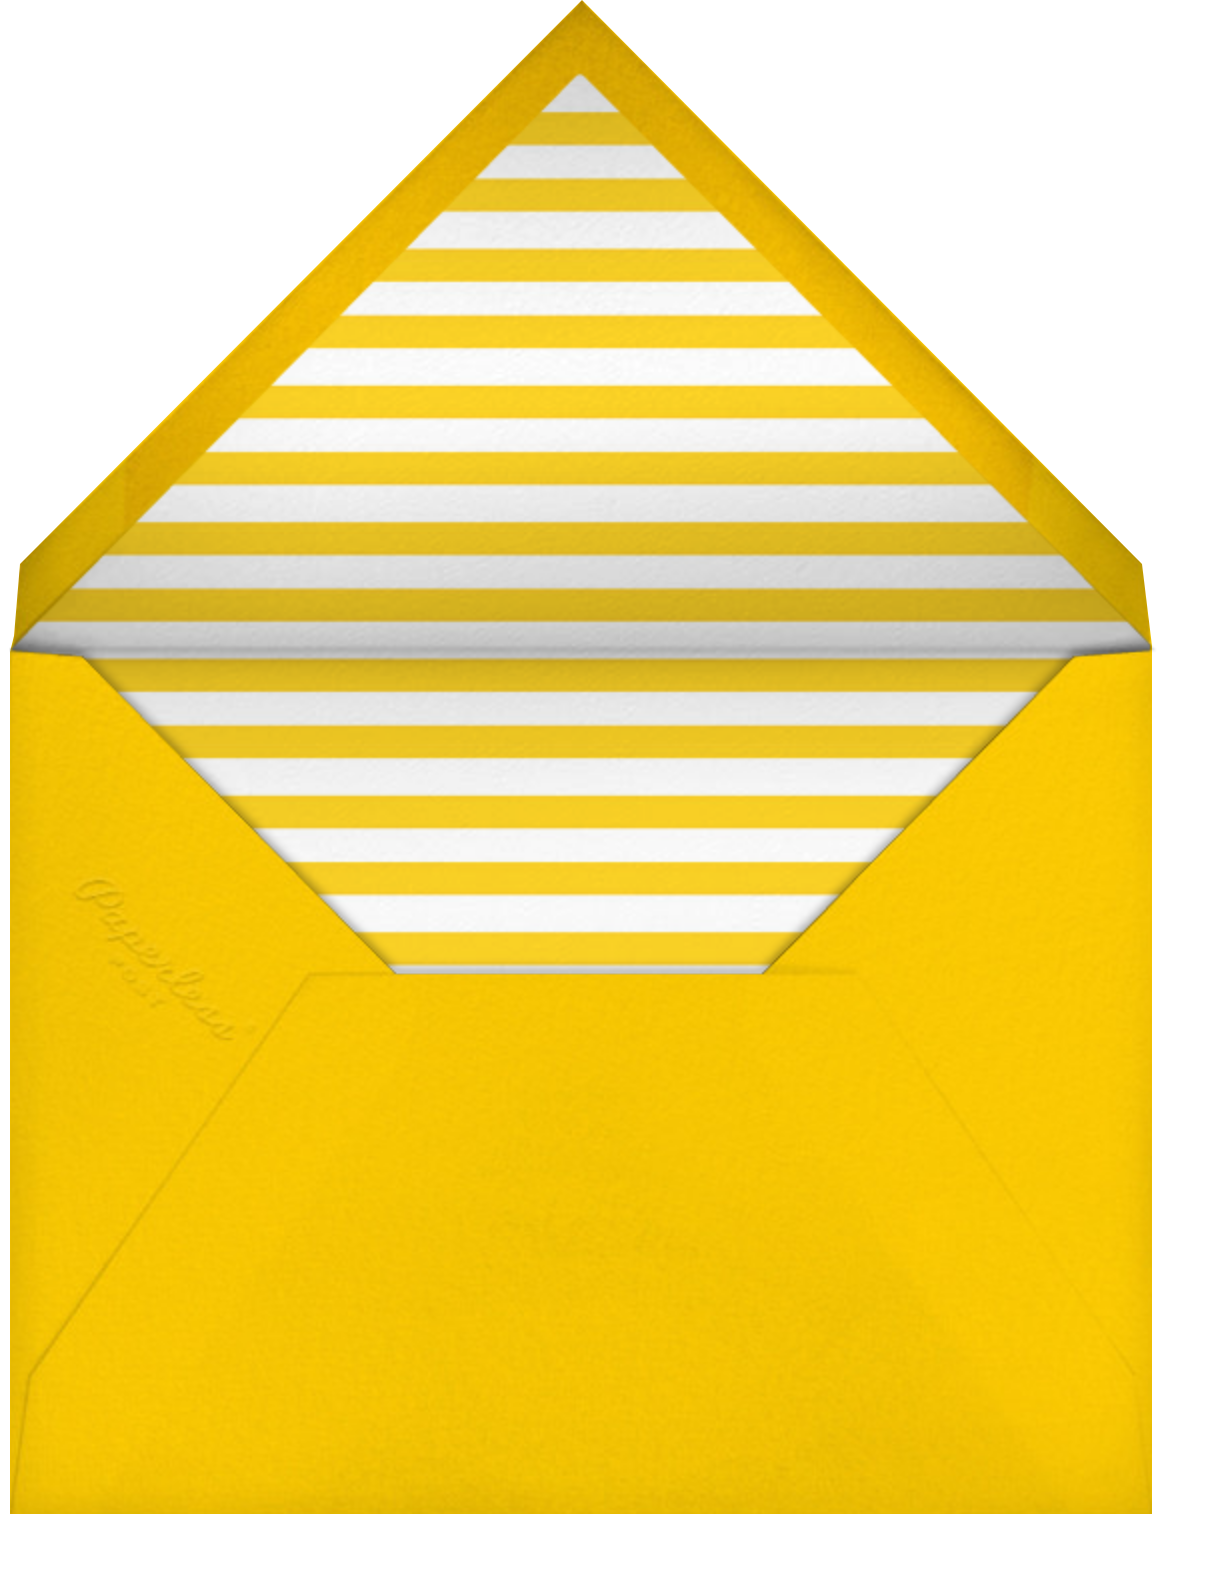 All About You (Photo) - Paperless Post - Envelope